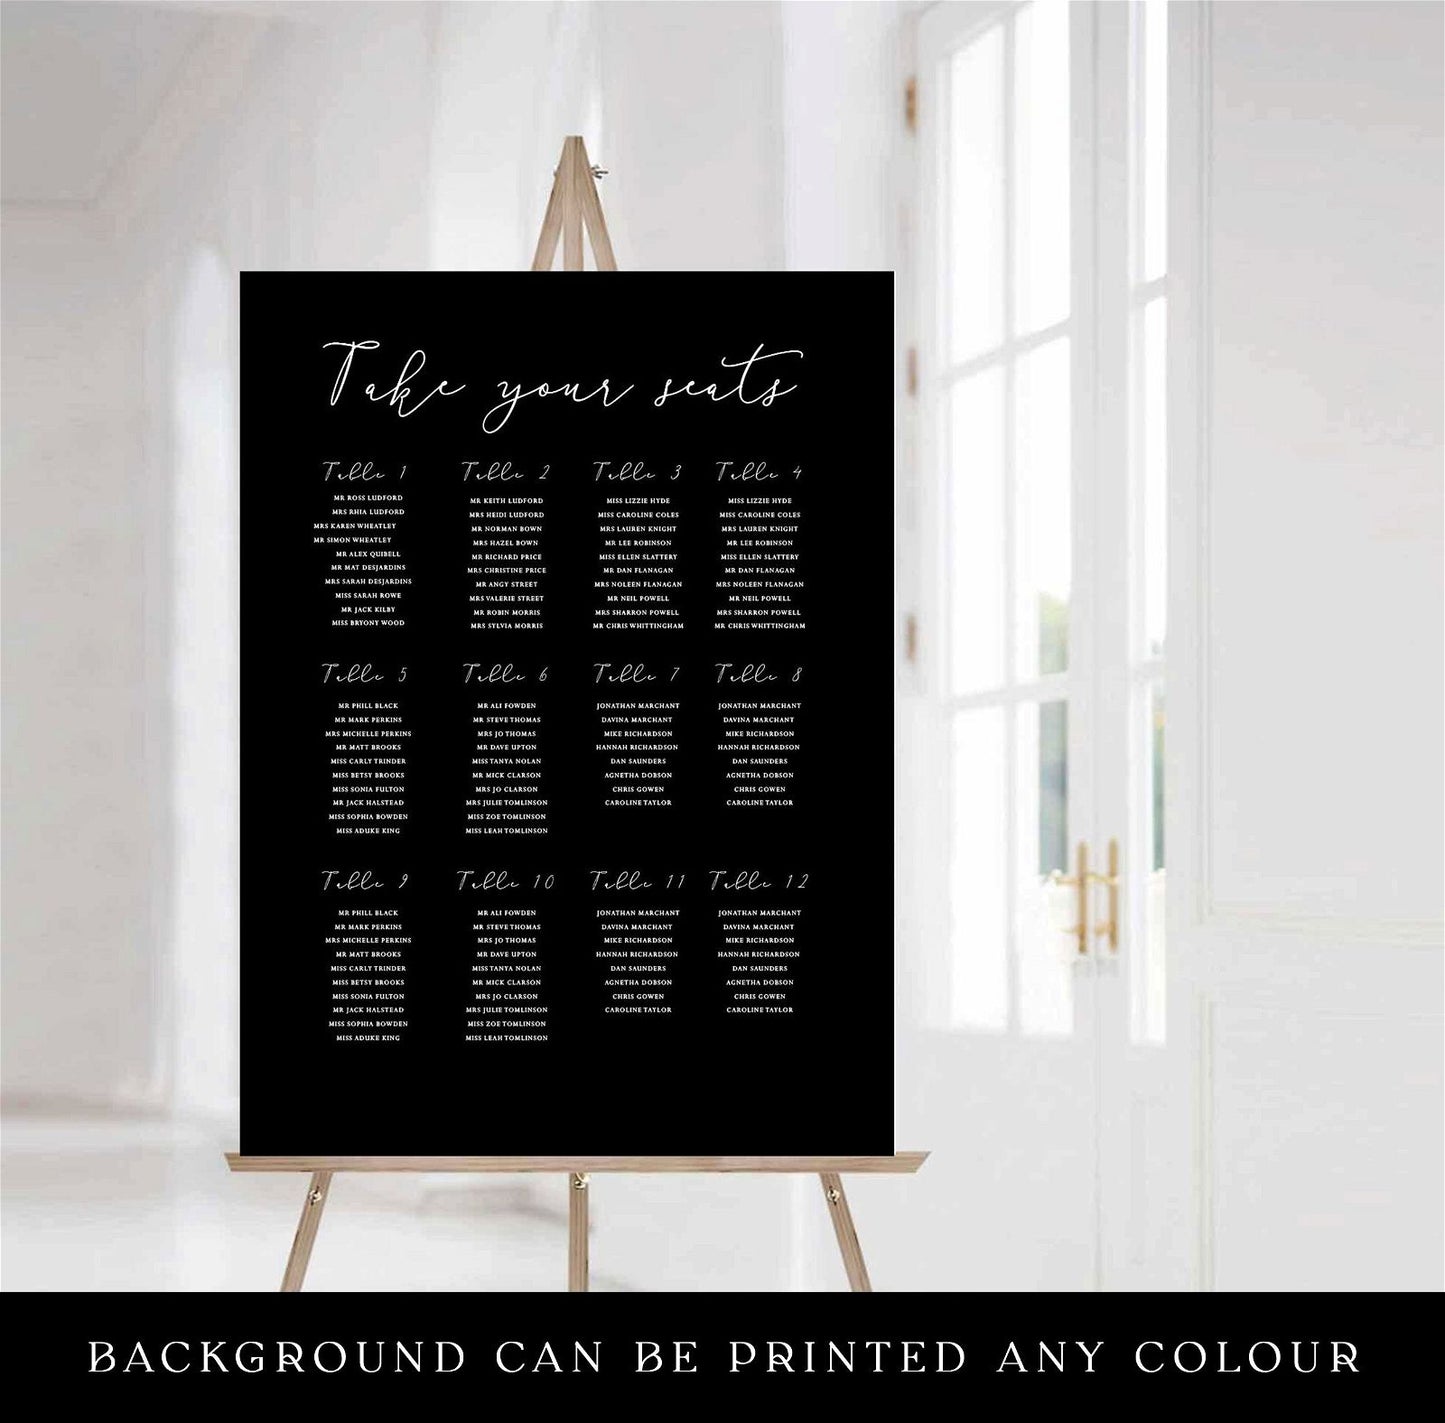 He Put A Ring On It Engagement Party Sign  Ivy and Gold Wedding Stationery   